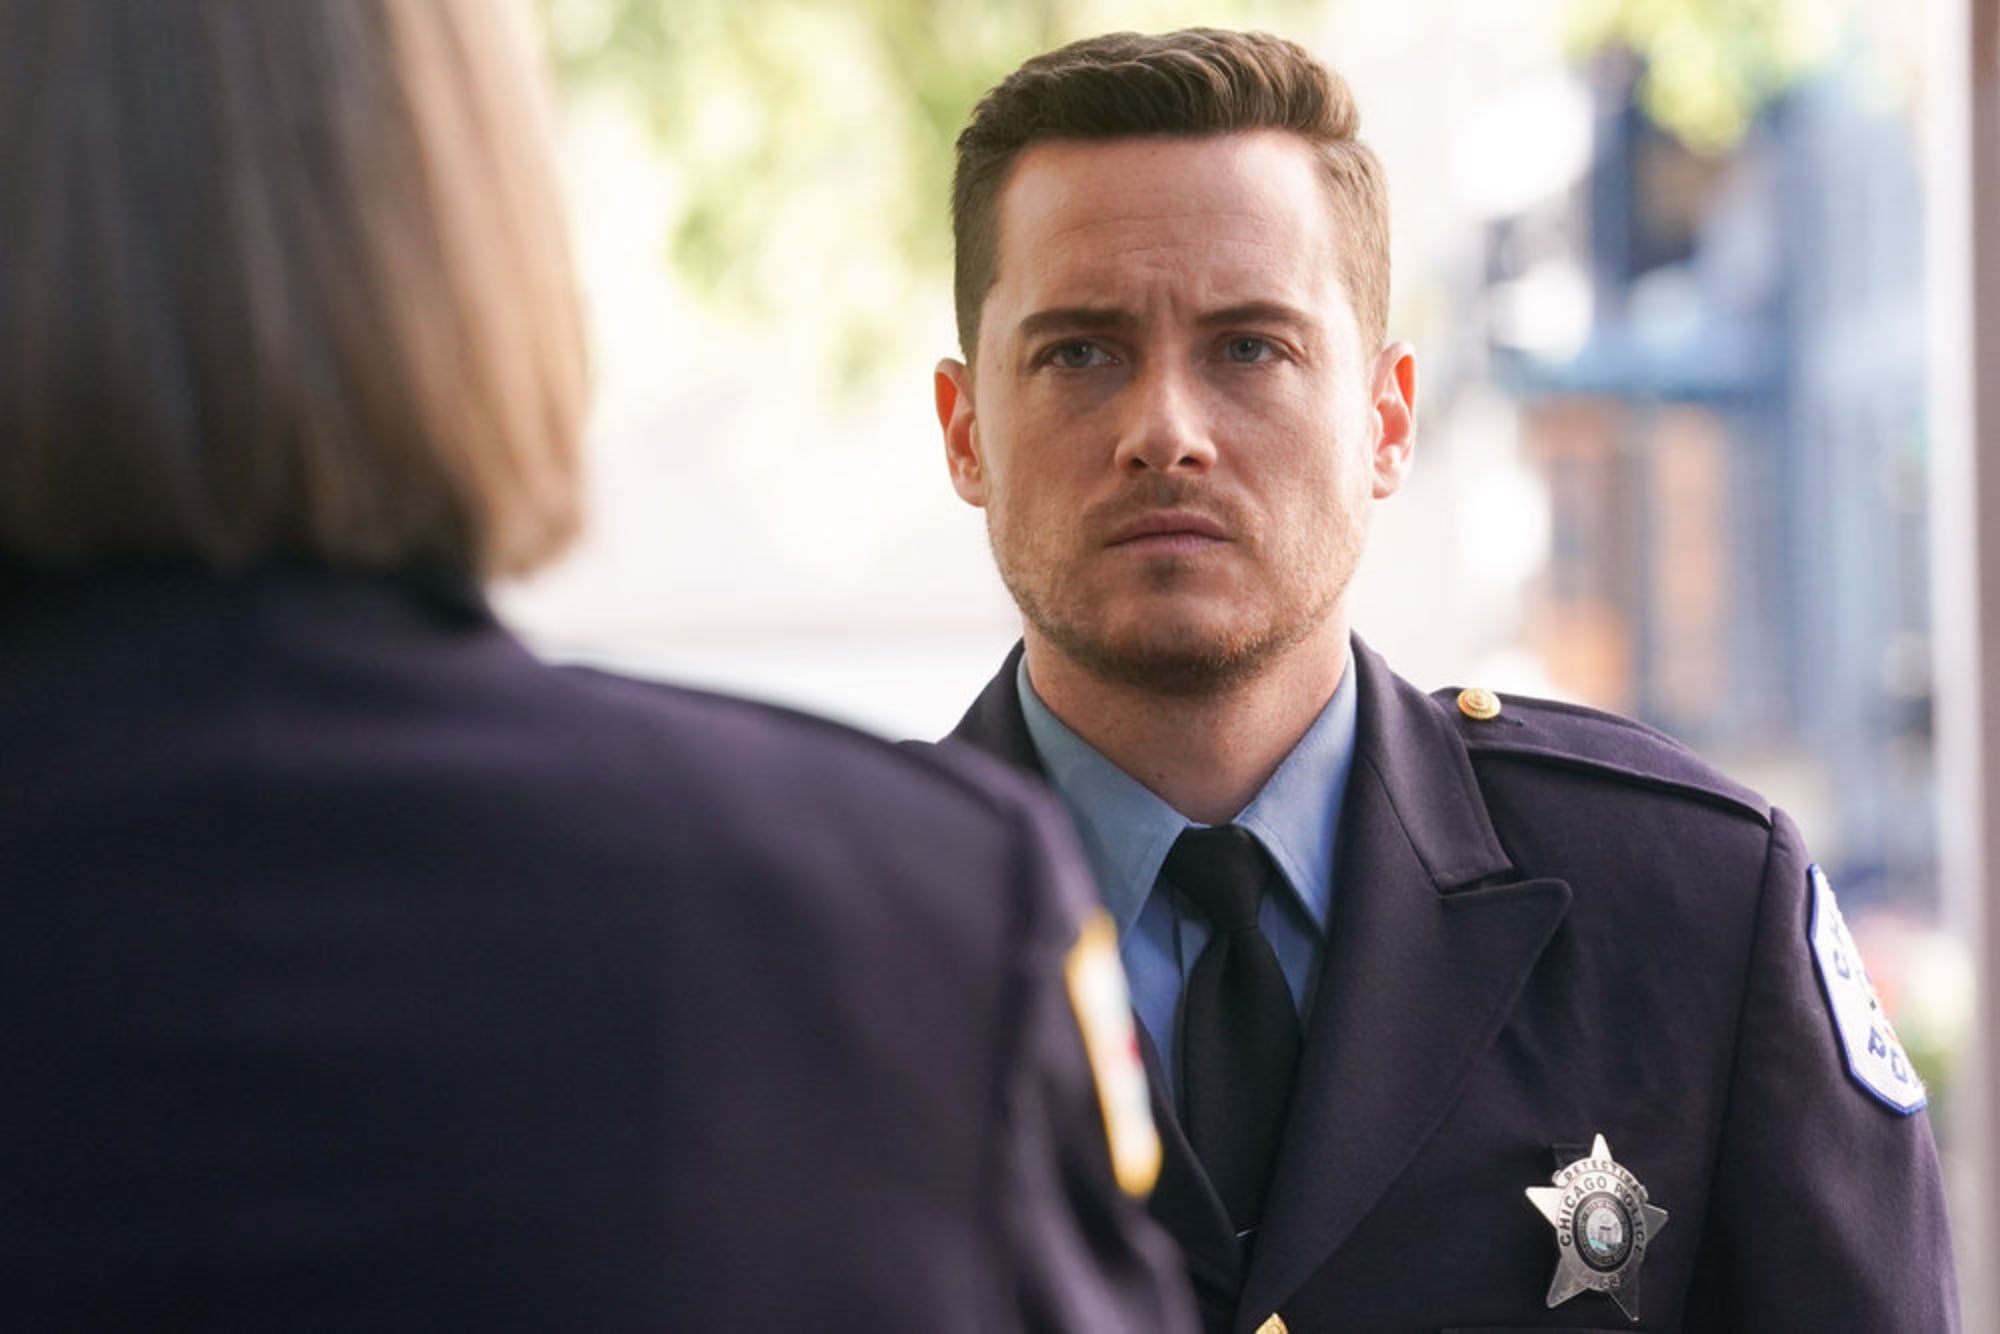 Is Chicago PD's Jesse Lee Soffer going to be in a new show?